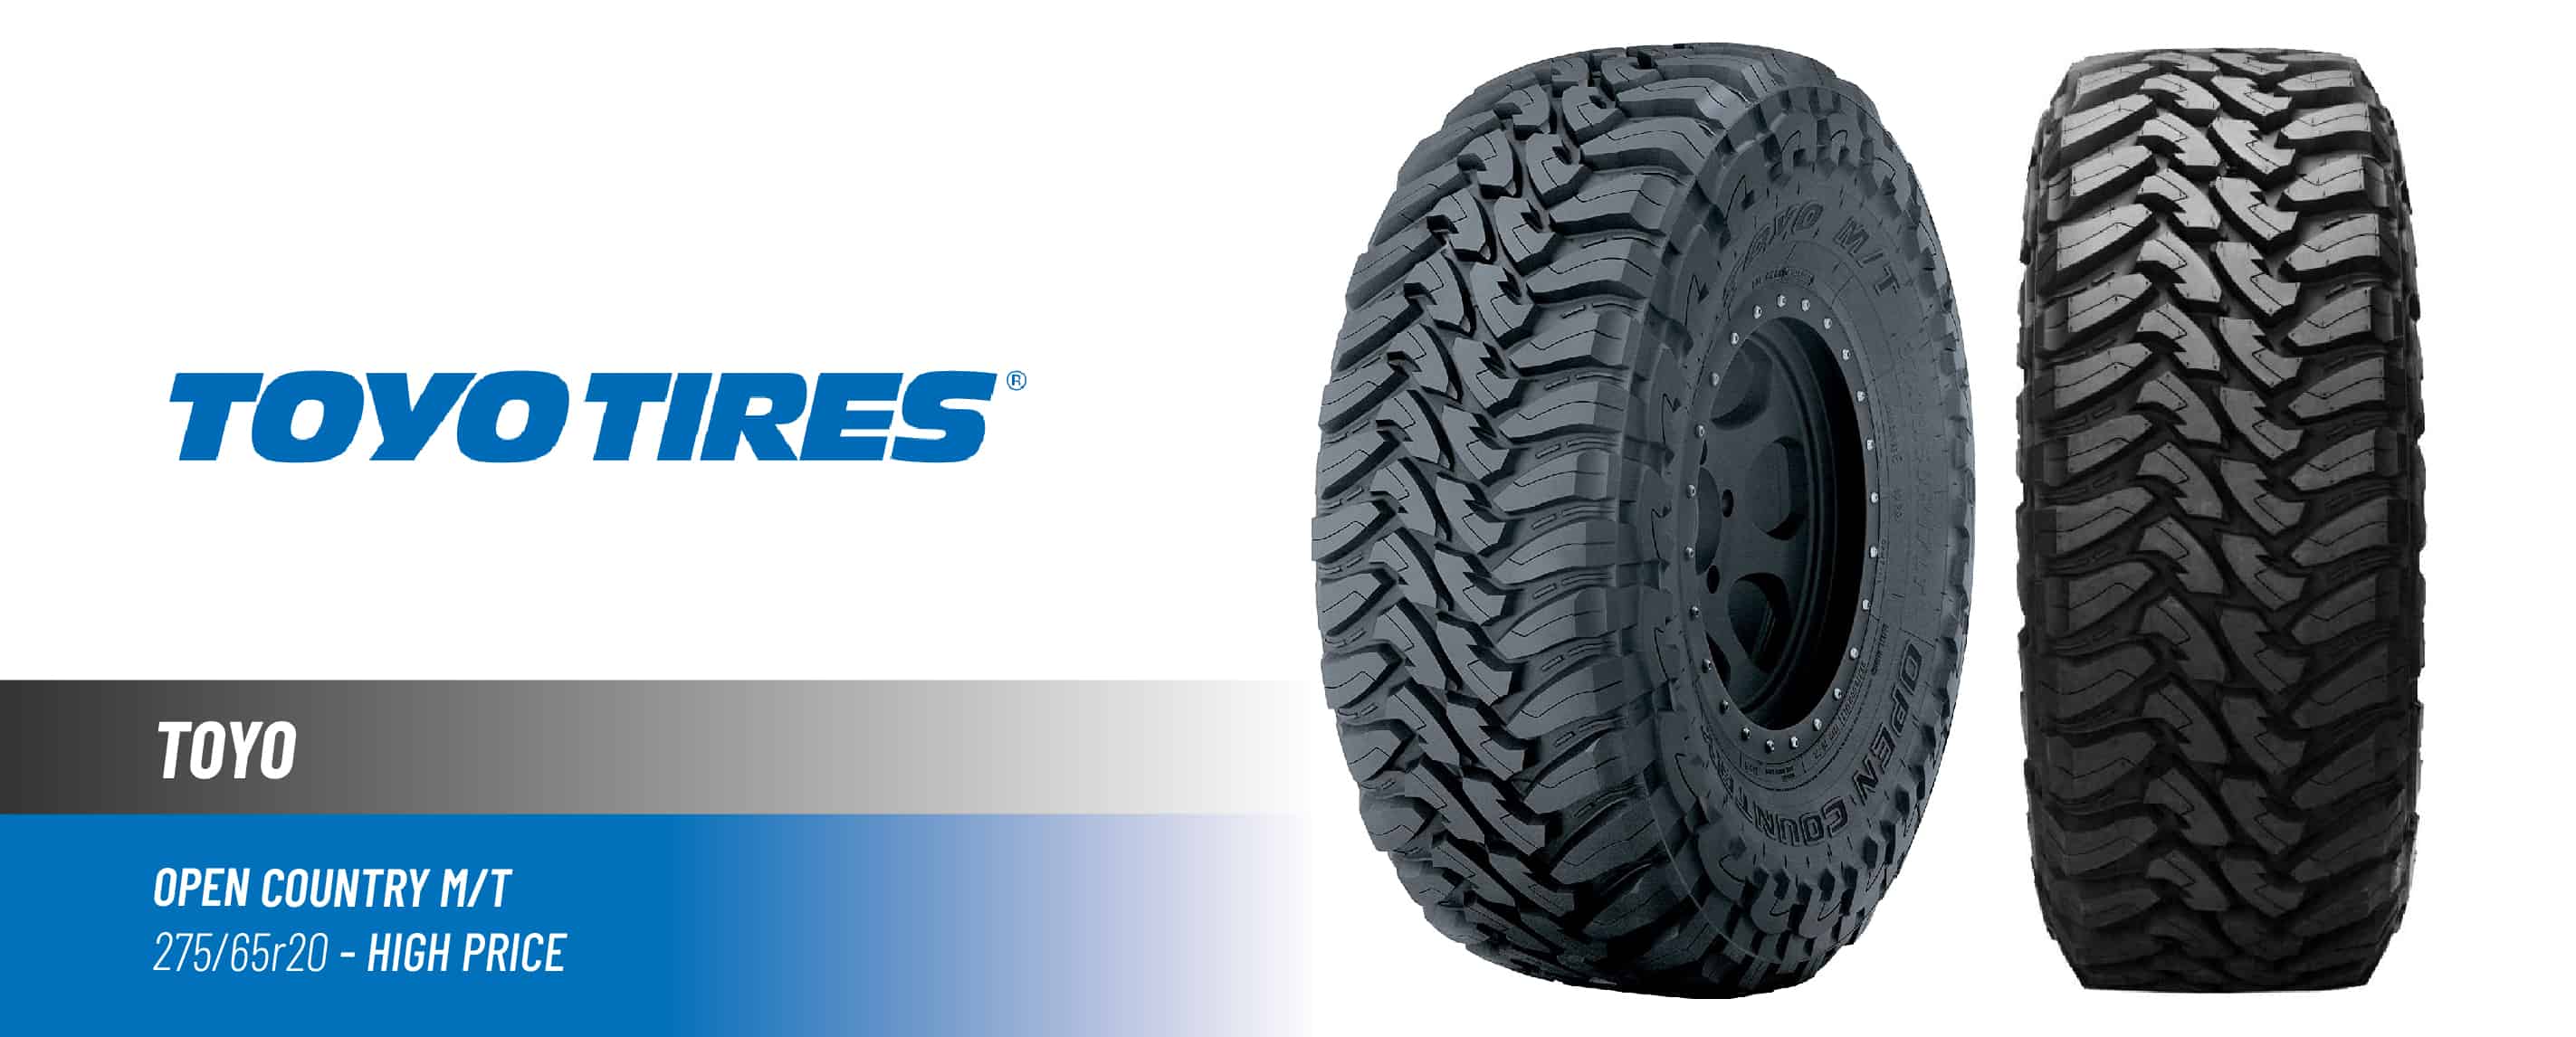 Top#1 High Price: Toyo Open Country M/T – best 275/65r20